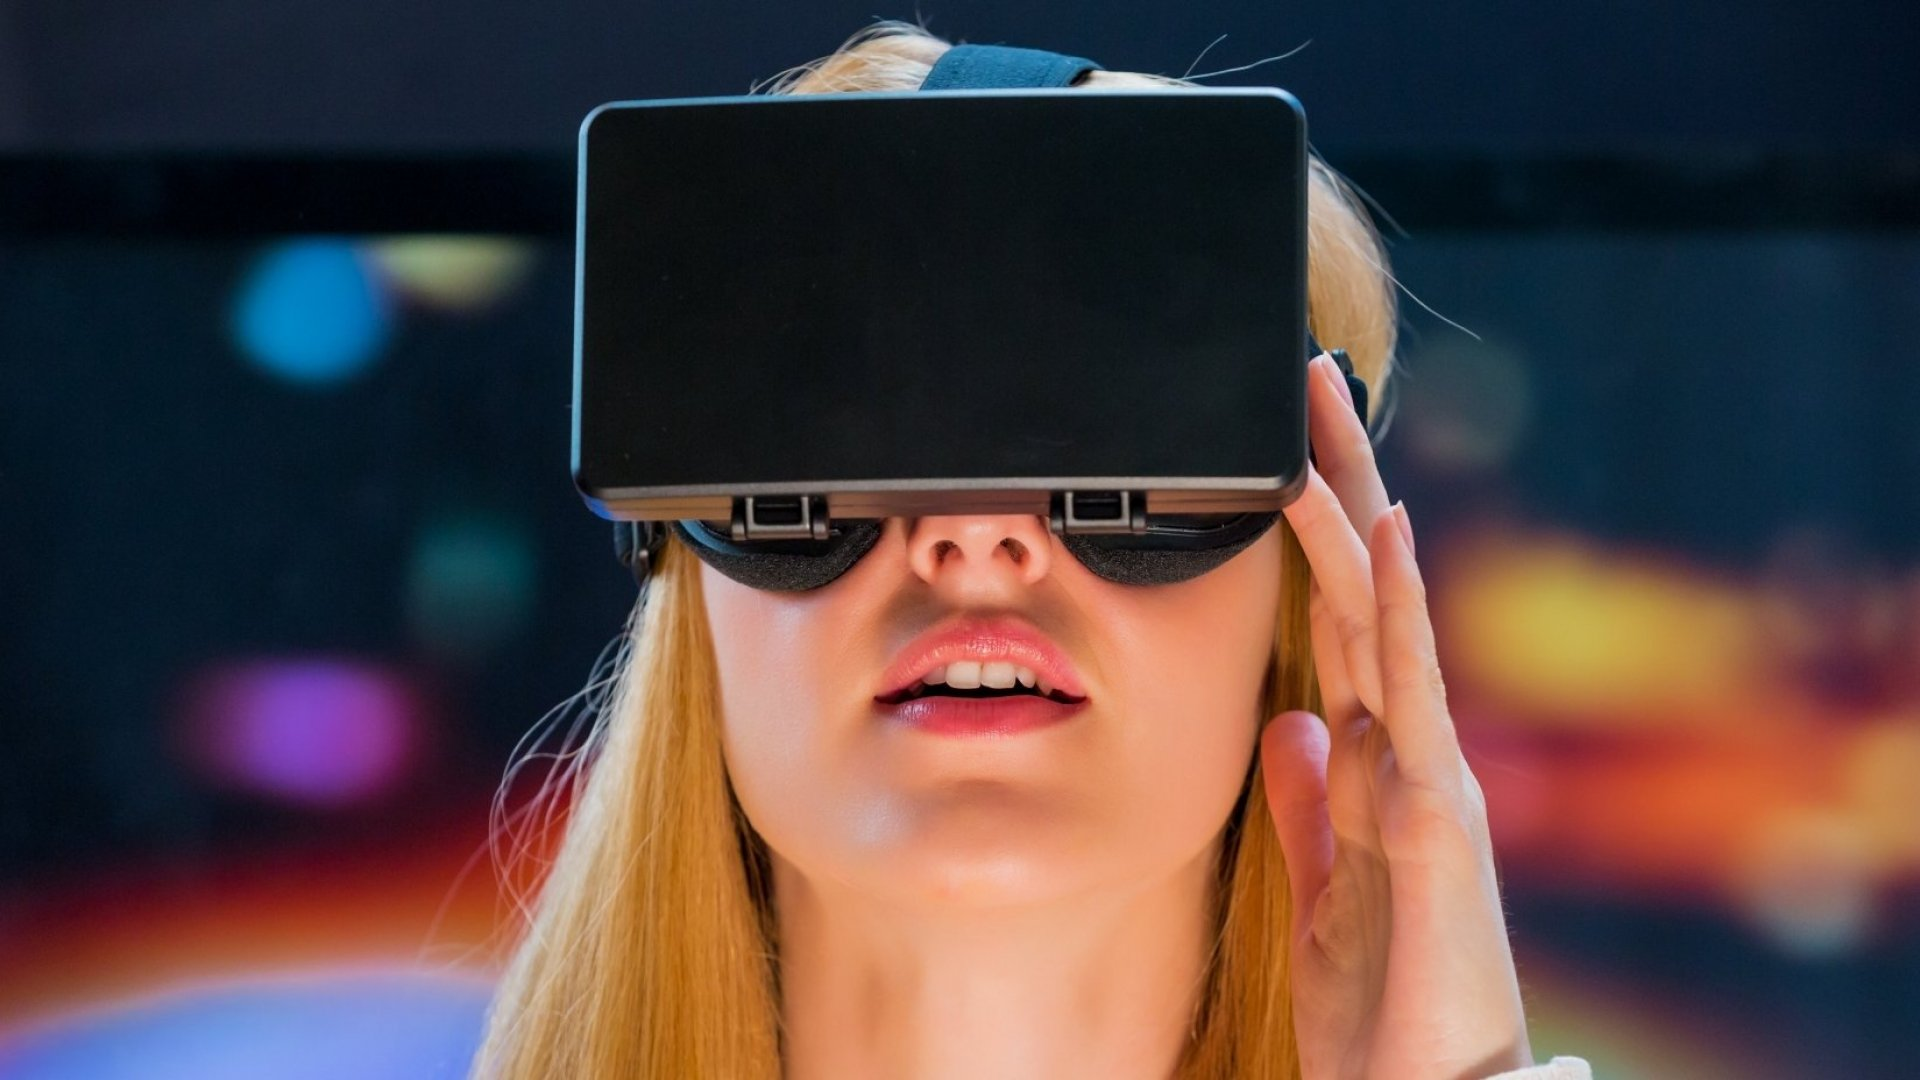 Virtual Reality Products and Services Market